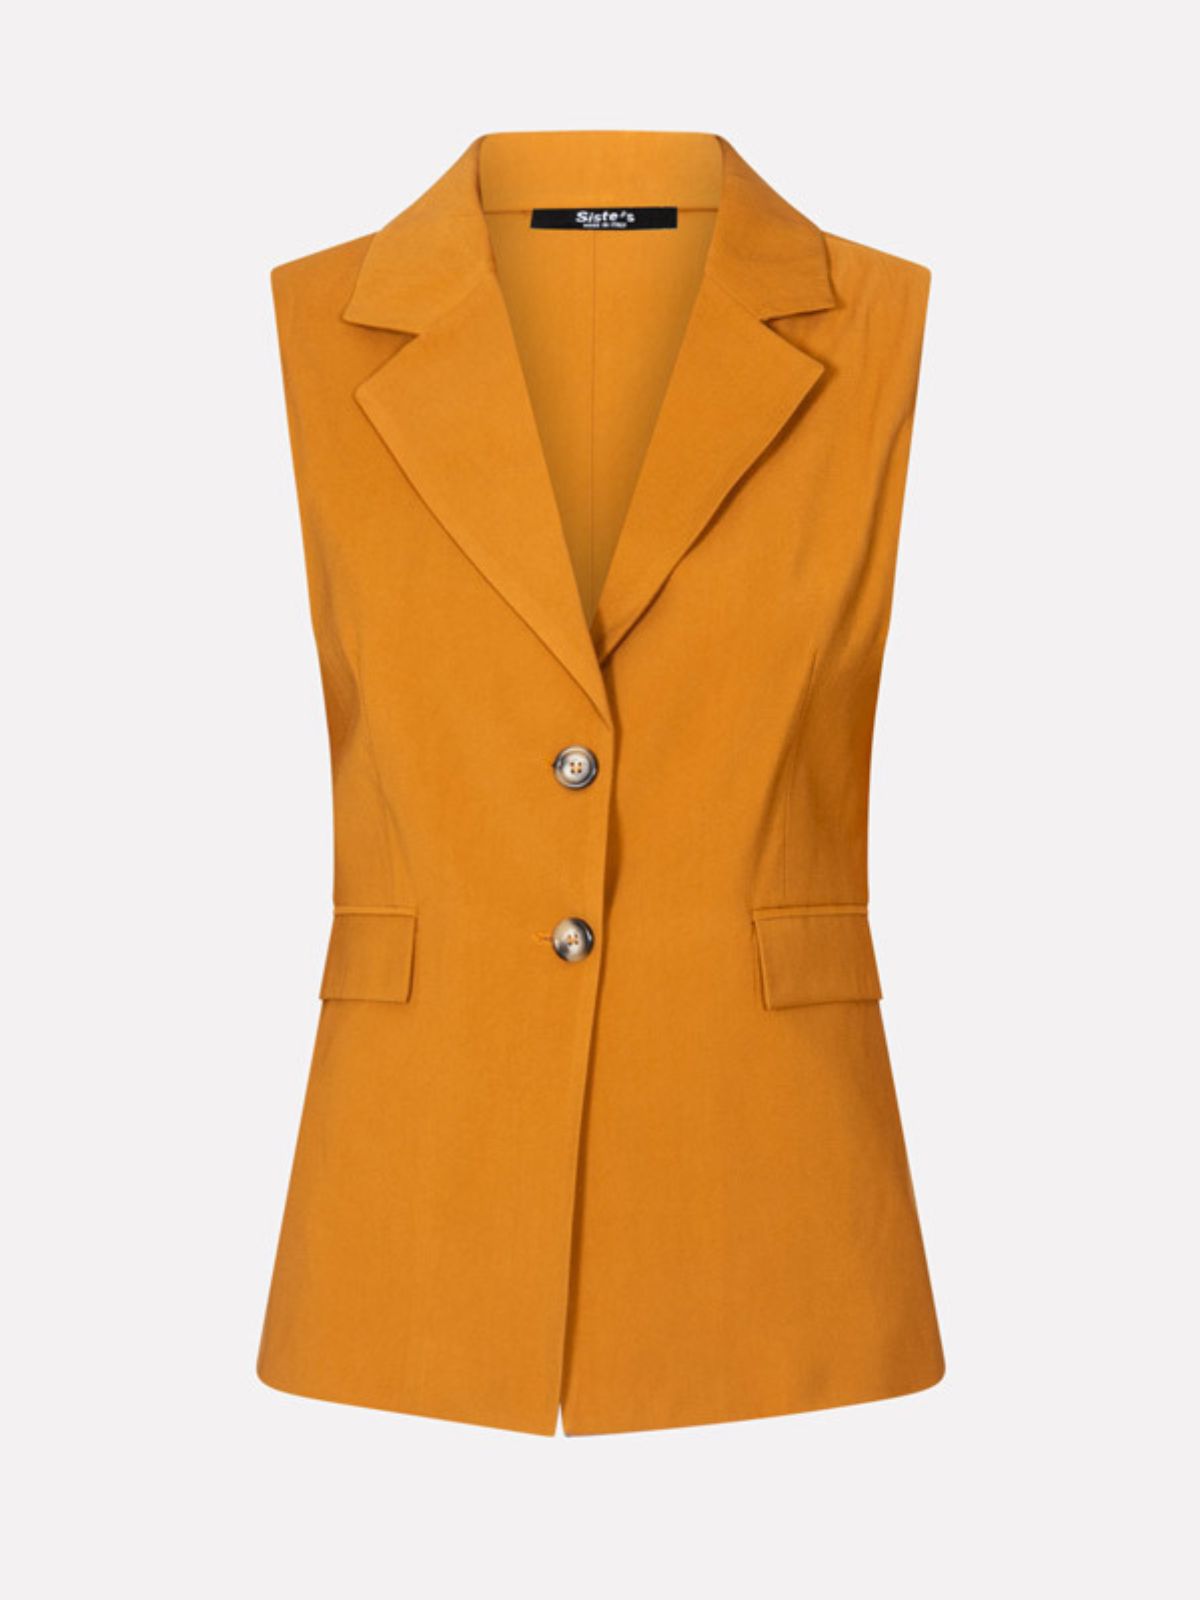 Gilet in viscosa curry